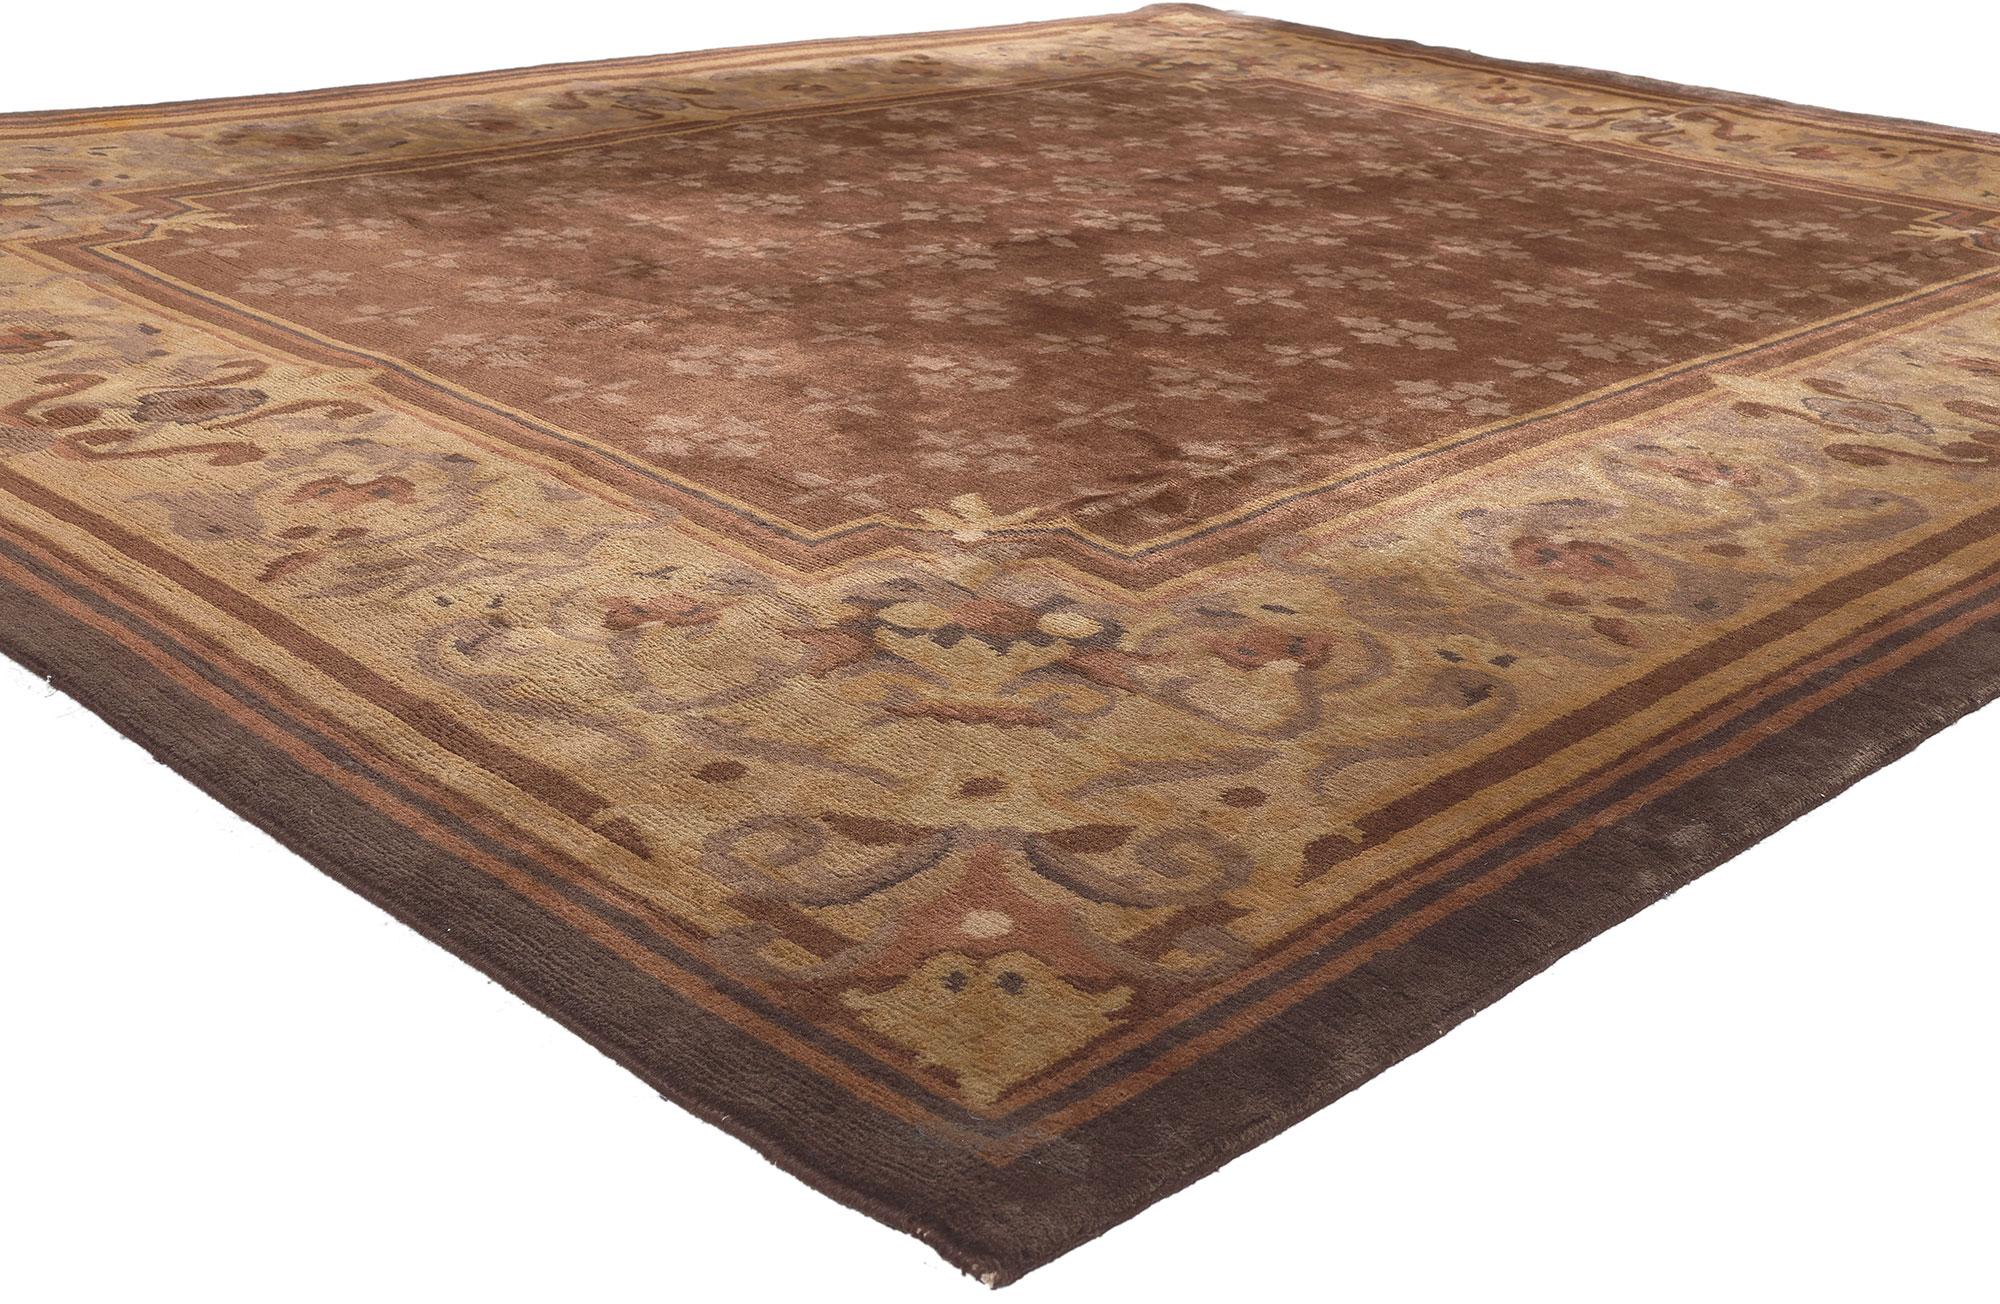 78458 Vintage Nepalese Tibetan Rug with Aubusson Design, 07'08 x 09'11.
Earth-tone elegance collides with traditional sensibility in this vintage Tibetan rug. The intricate Aubusson design and earthy colors woven into this piece work together